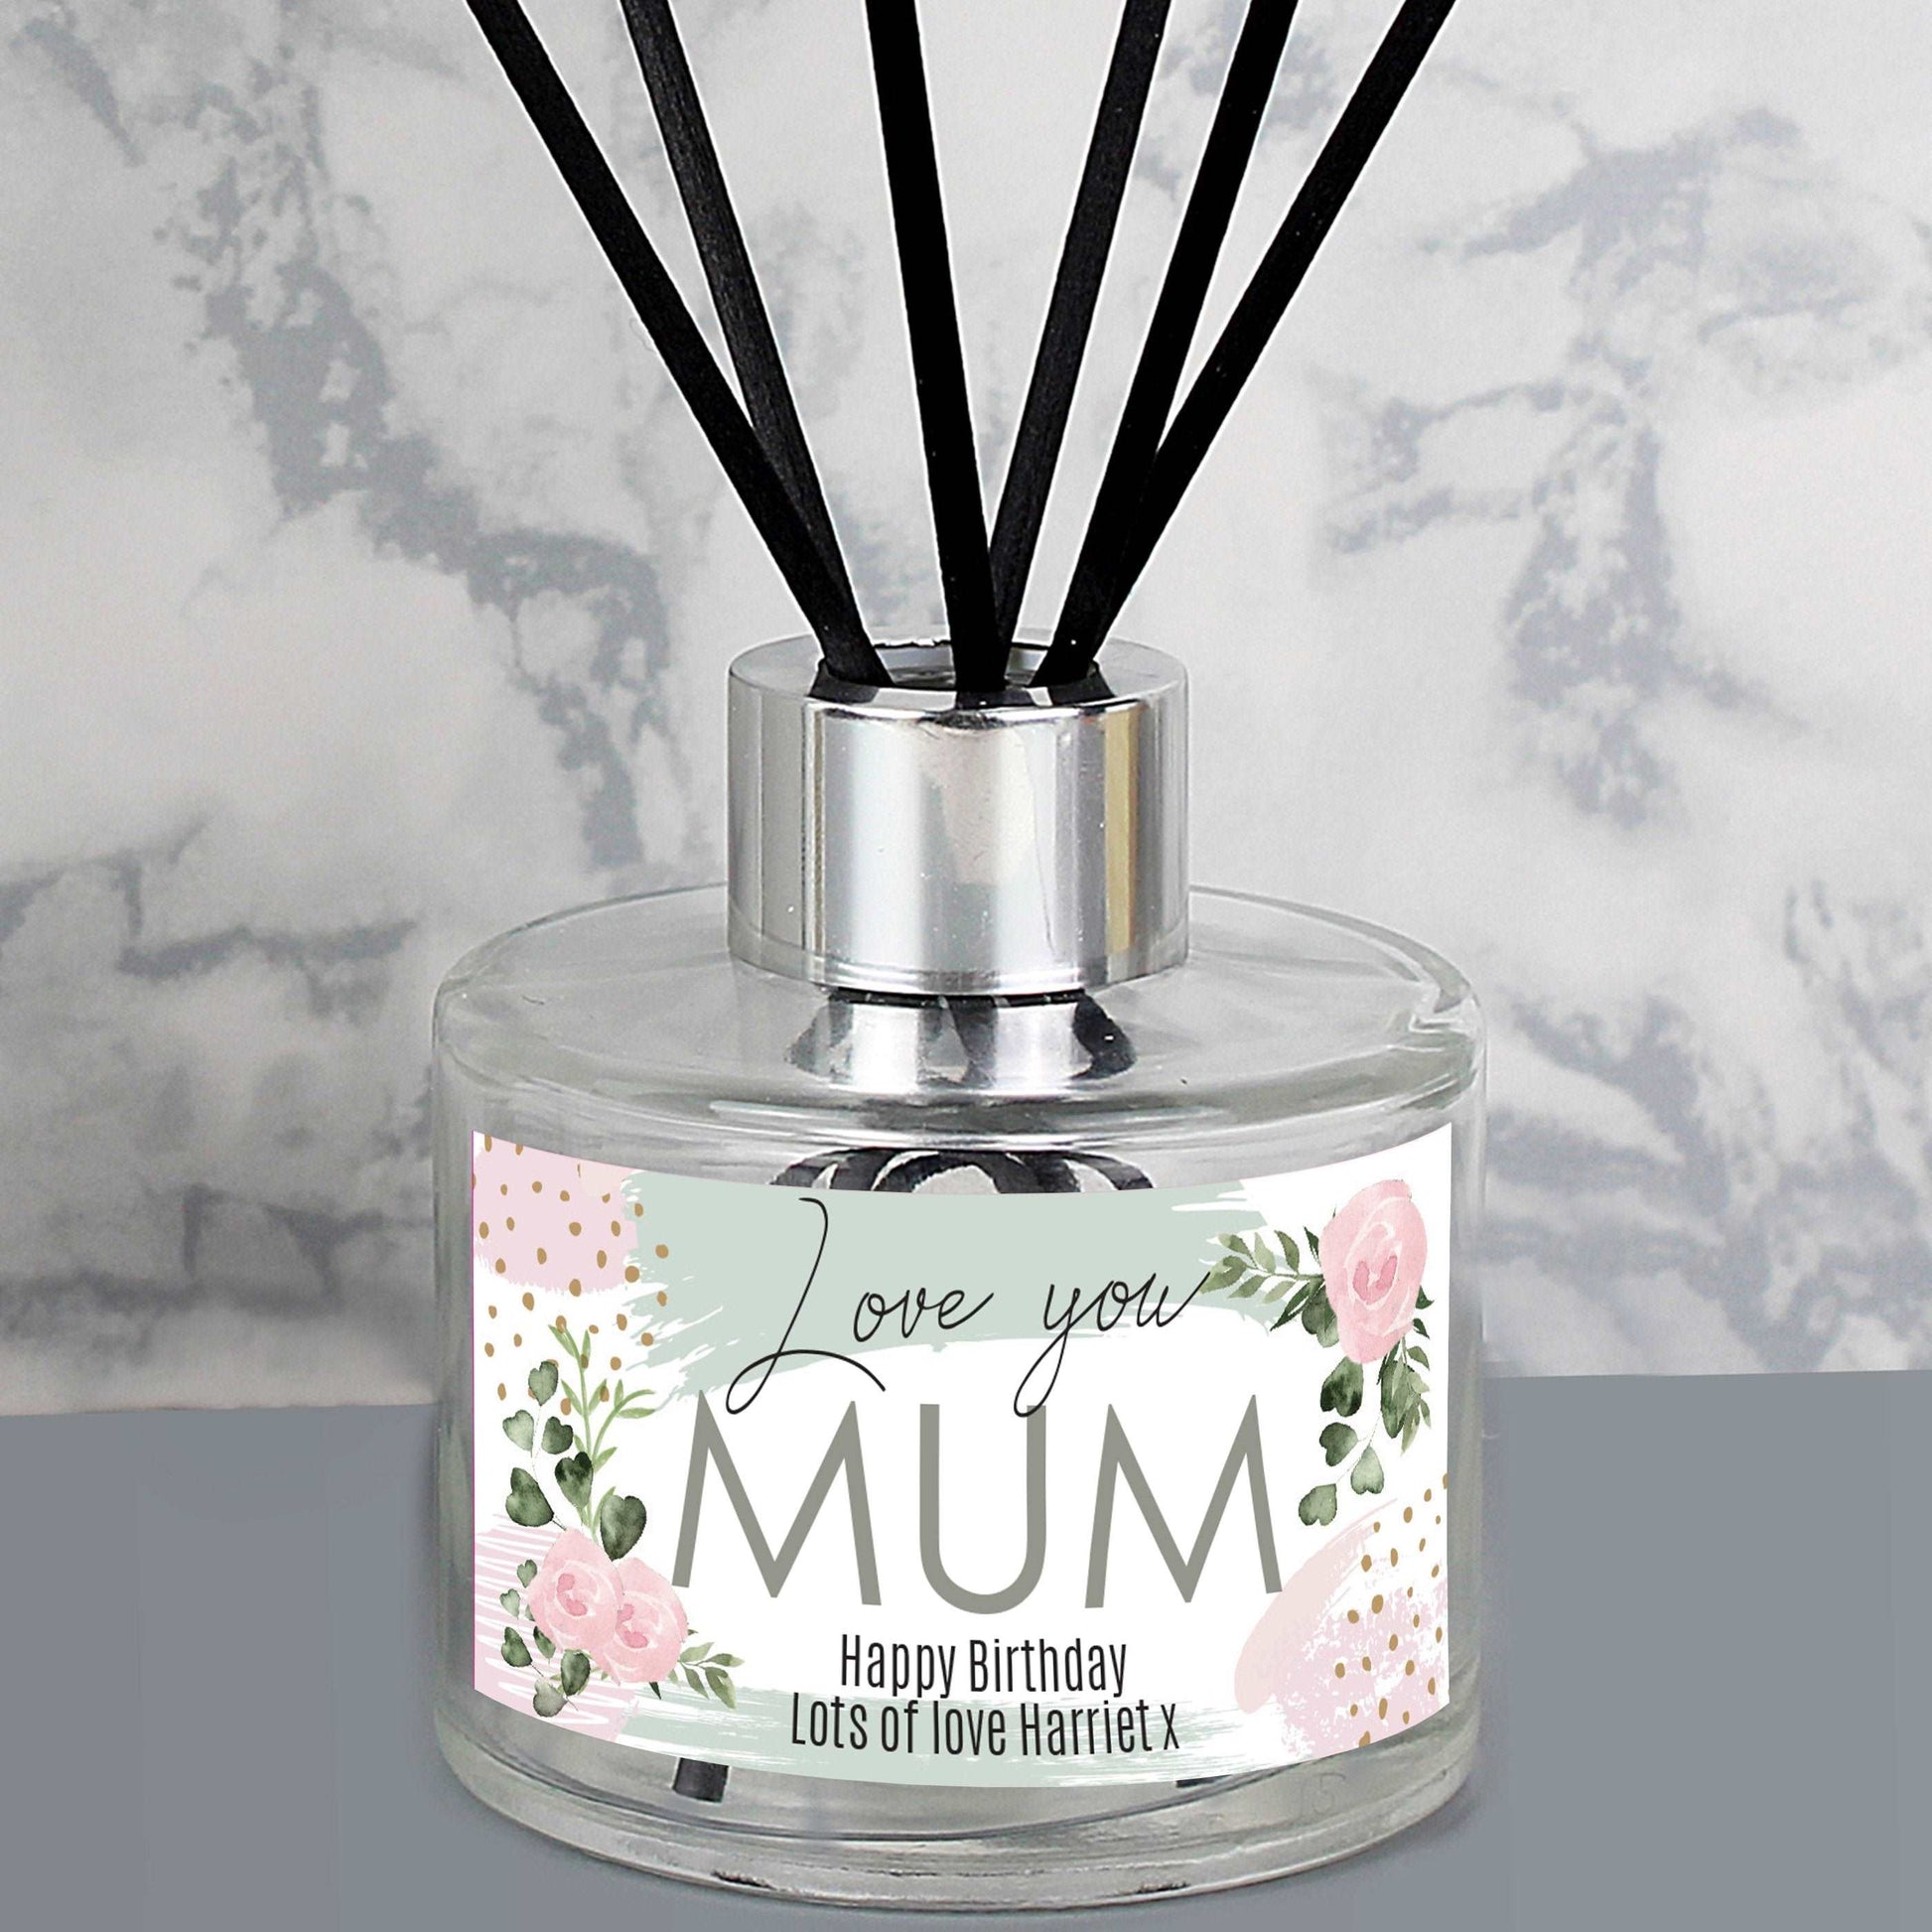 Personalised floral abstract design personalised reed diffuser home fragrance By Sweetlea Gifts